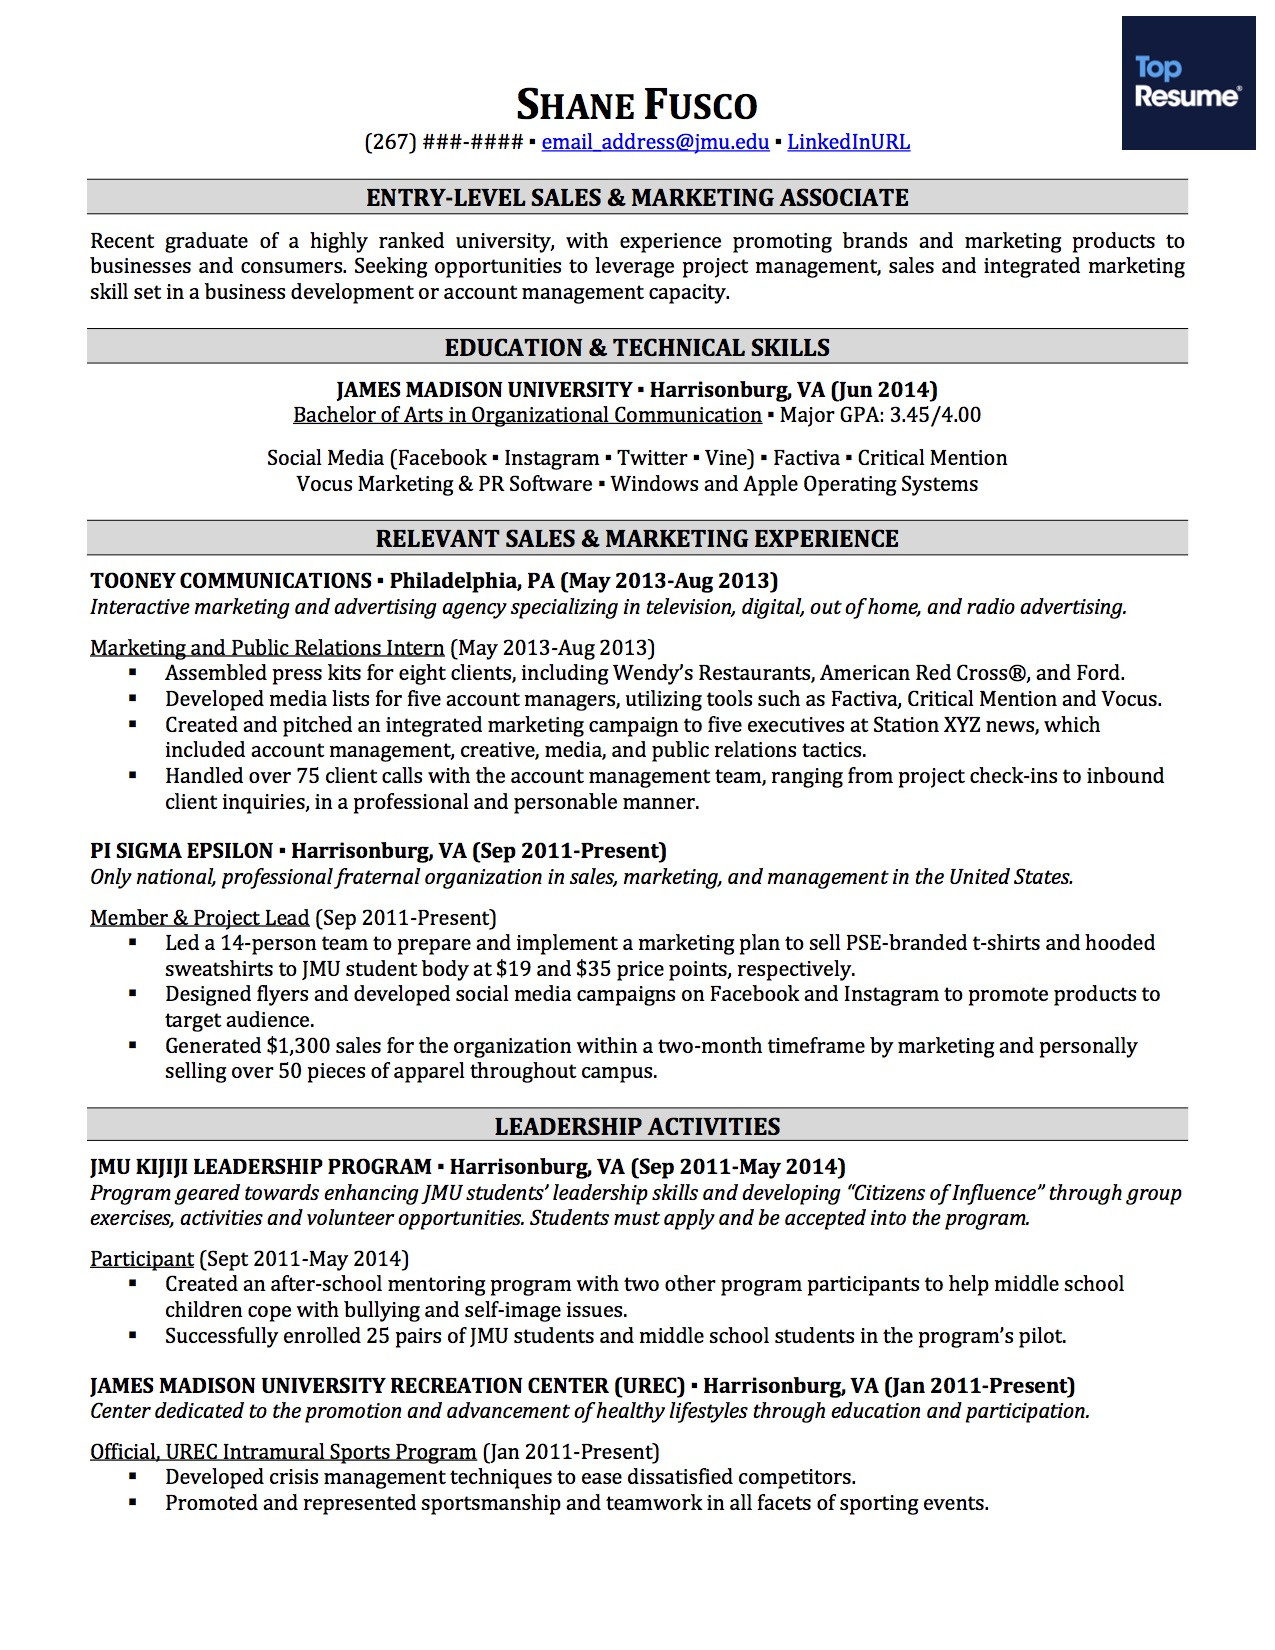 Beginners Resume with No Experience Template How to Make A Resume with No Experience topresume